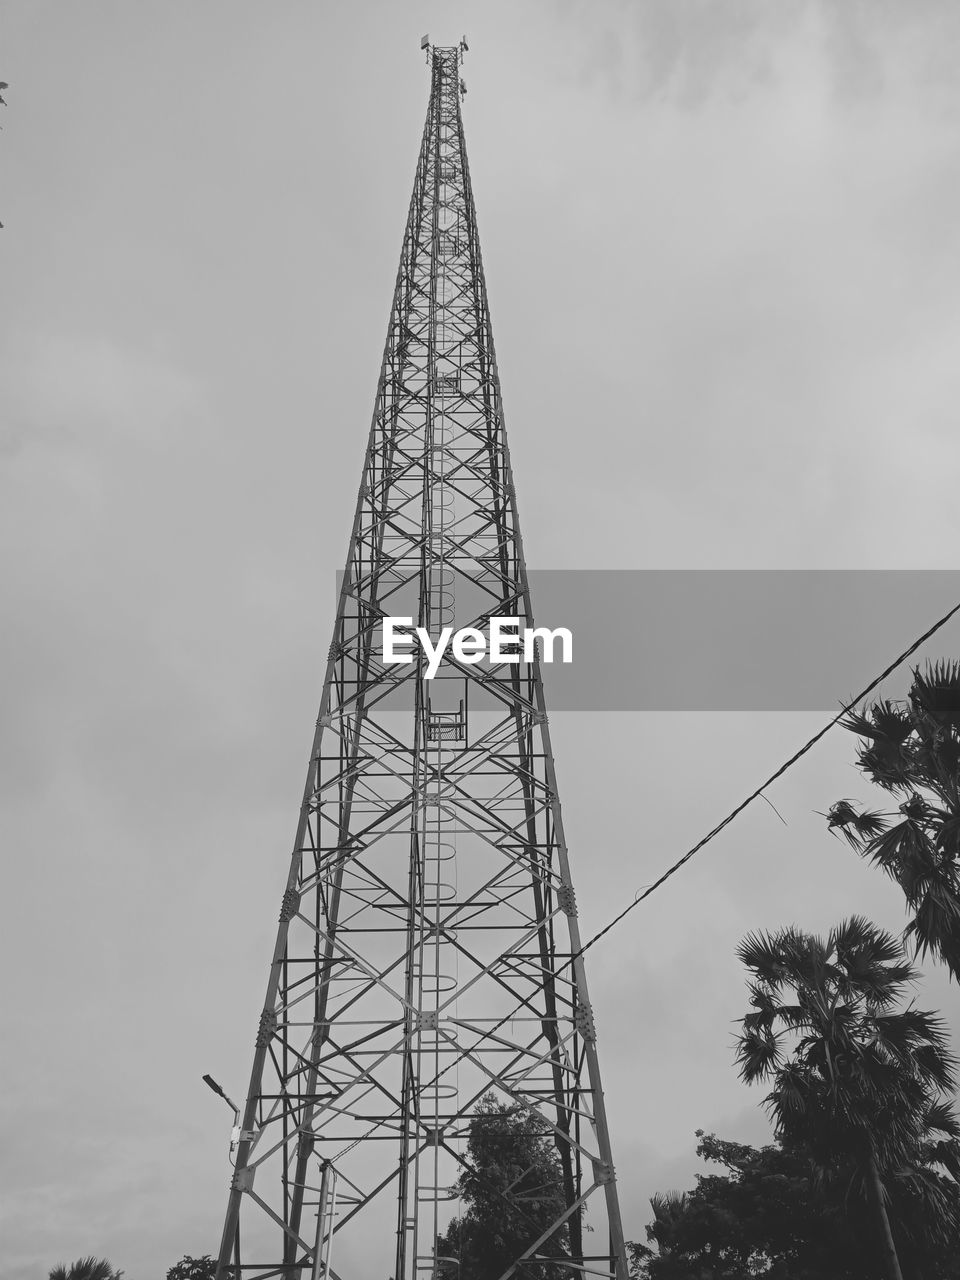 tower, architecture, built structure, sky, black and white, transmission tower, cloud, nature, tree, technology, metal, low angle view, monochrome, monochrome photography, plant, mast, line, no people, electricity, outdoors, steel, communication, alloy, industry, silhouette, business finance and industry, overhead power line, cable, electricity pylon, tower block, day, landmark, spire, communications tower, city, power generation